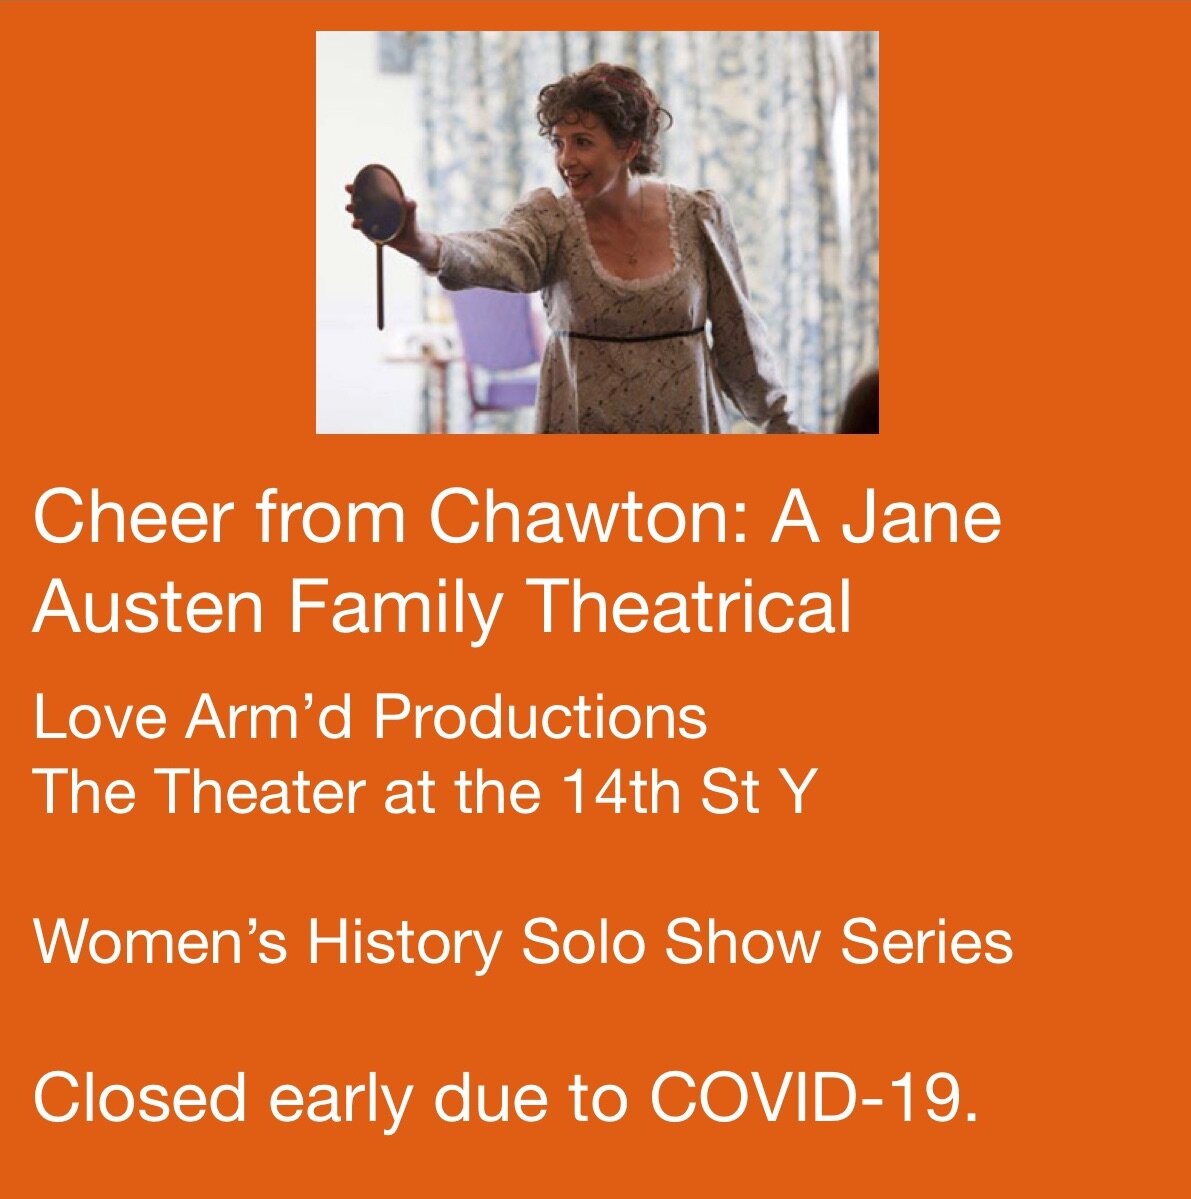 Cheer from Chatown: A Jane Austen Family Musical